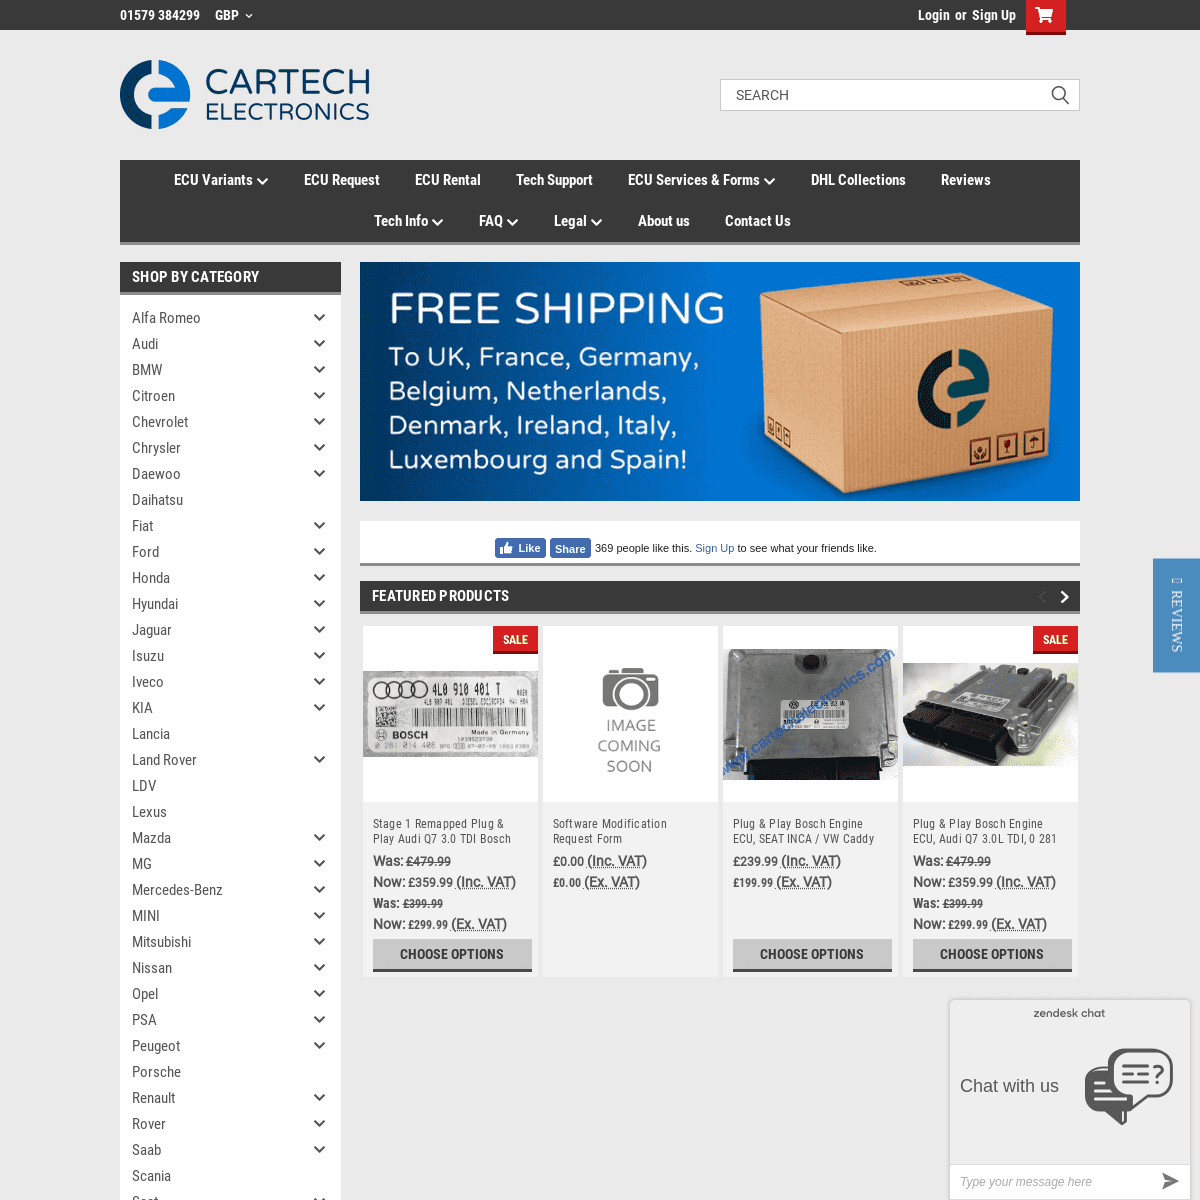 A complete backup of cartechelectronics.com